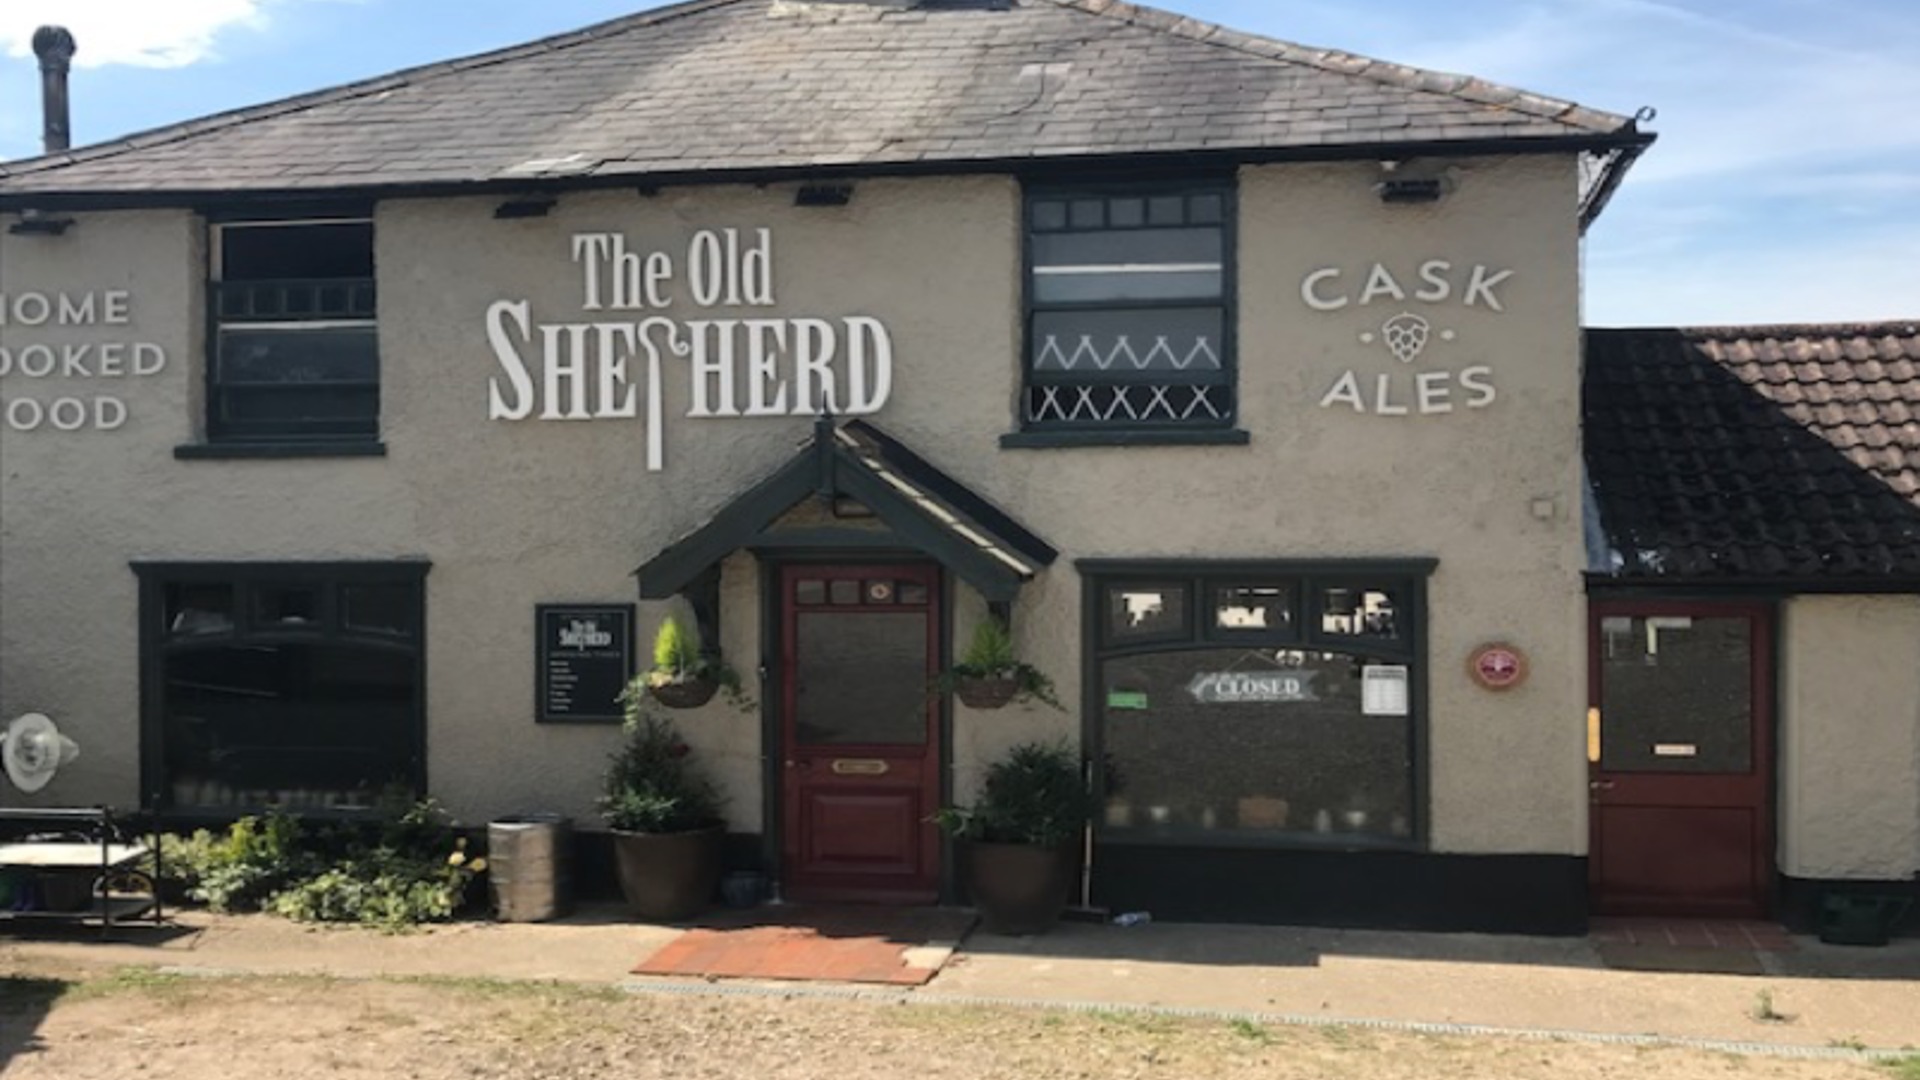 The Old Shephered could be yours to run. Photo: Find My Pub